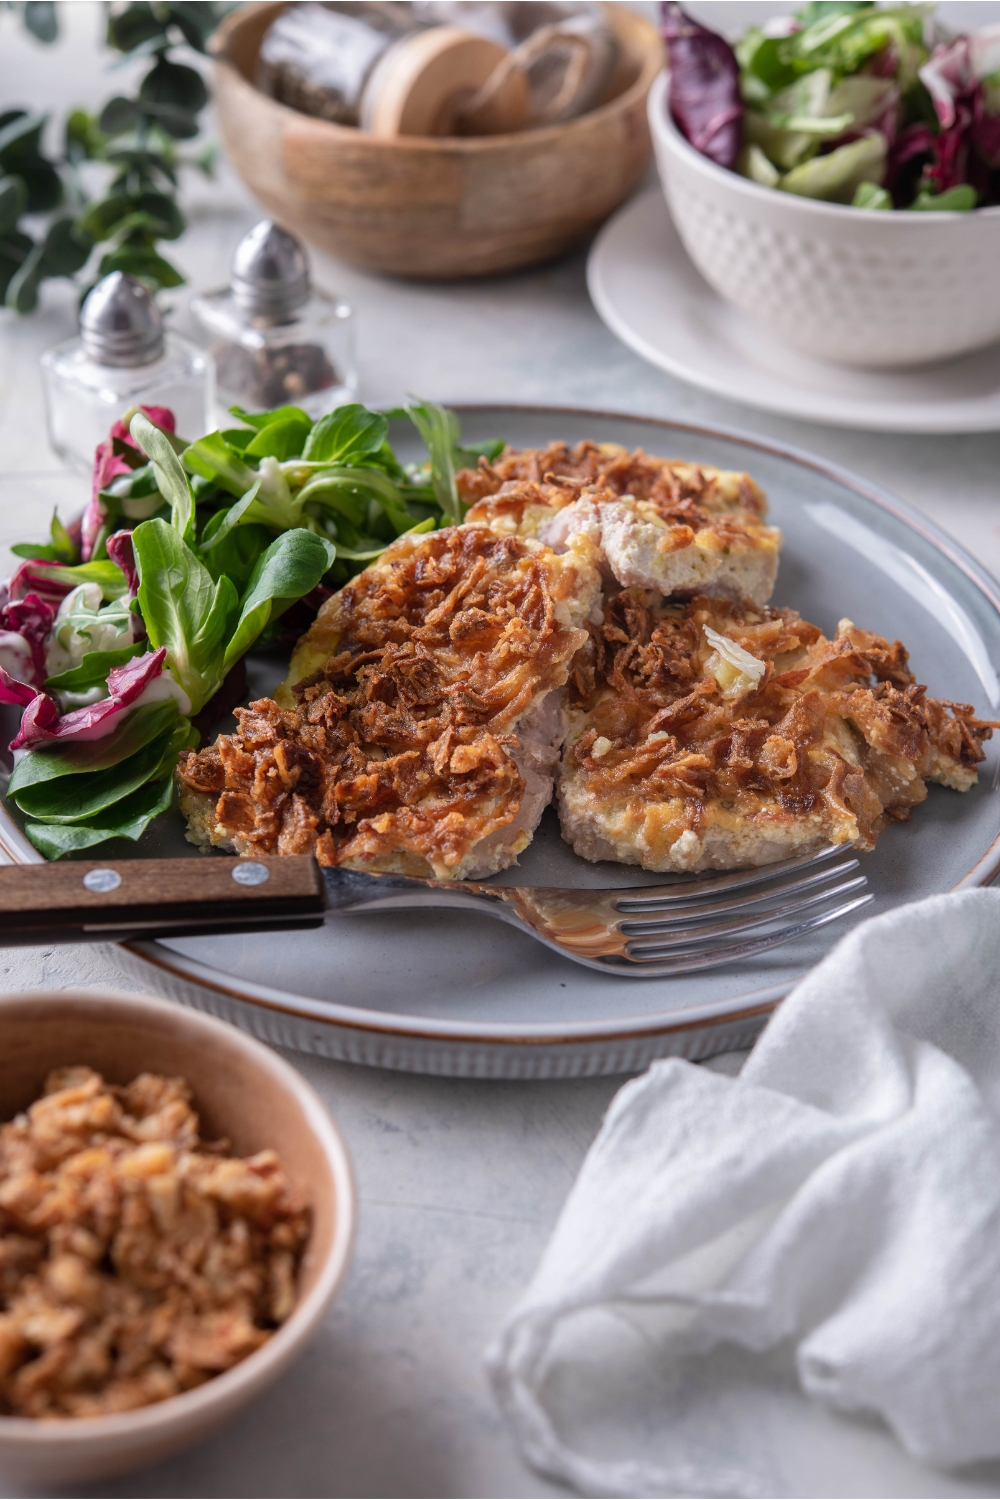 Three french onion pork chops piled on top of each other on a blue plate with a side salad and a fork on the plate.